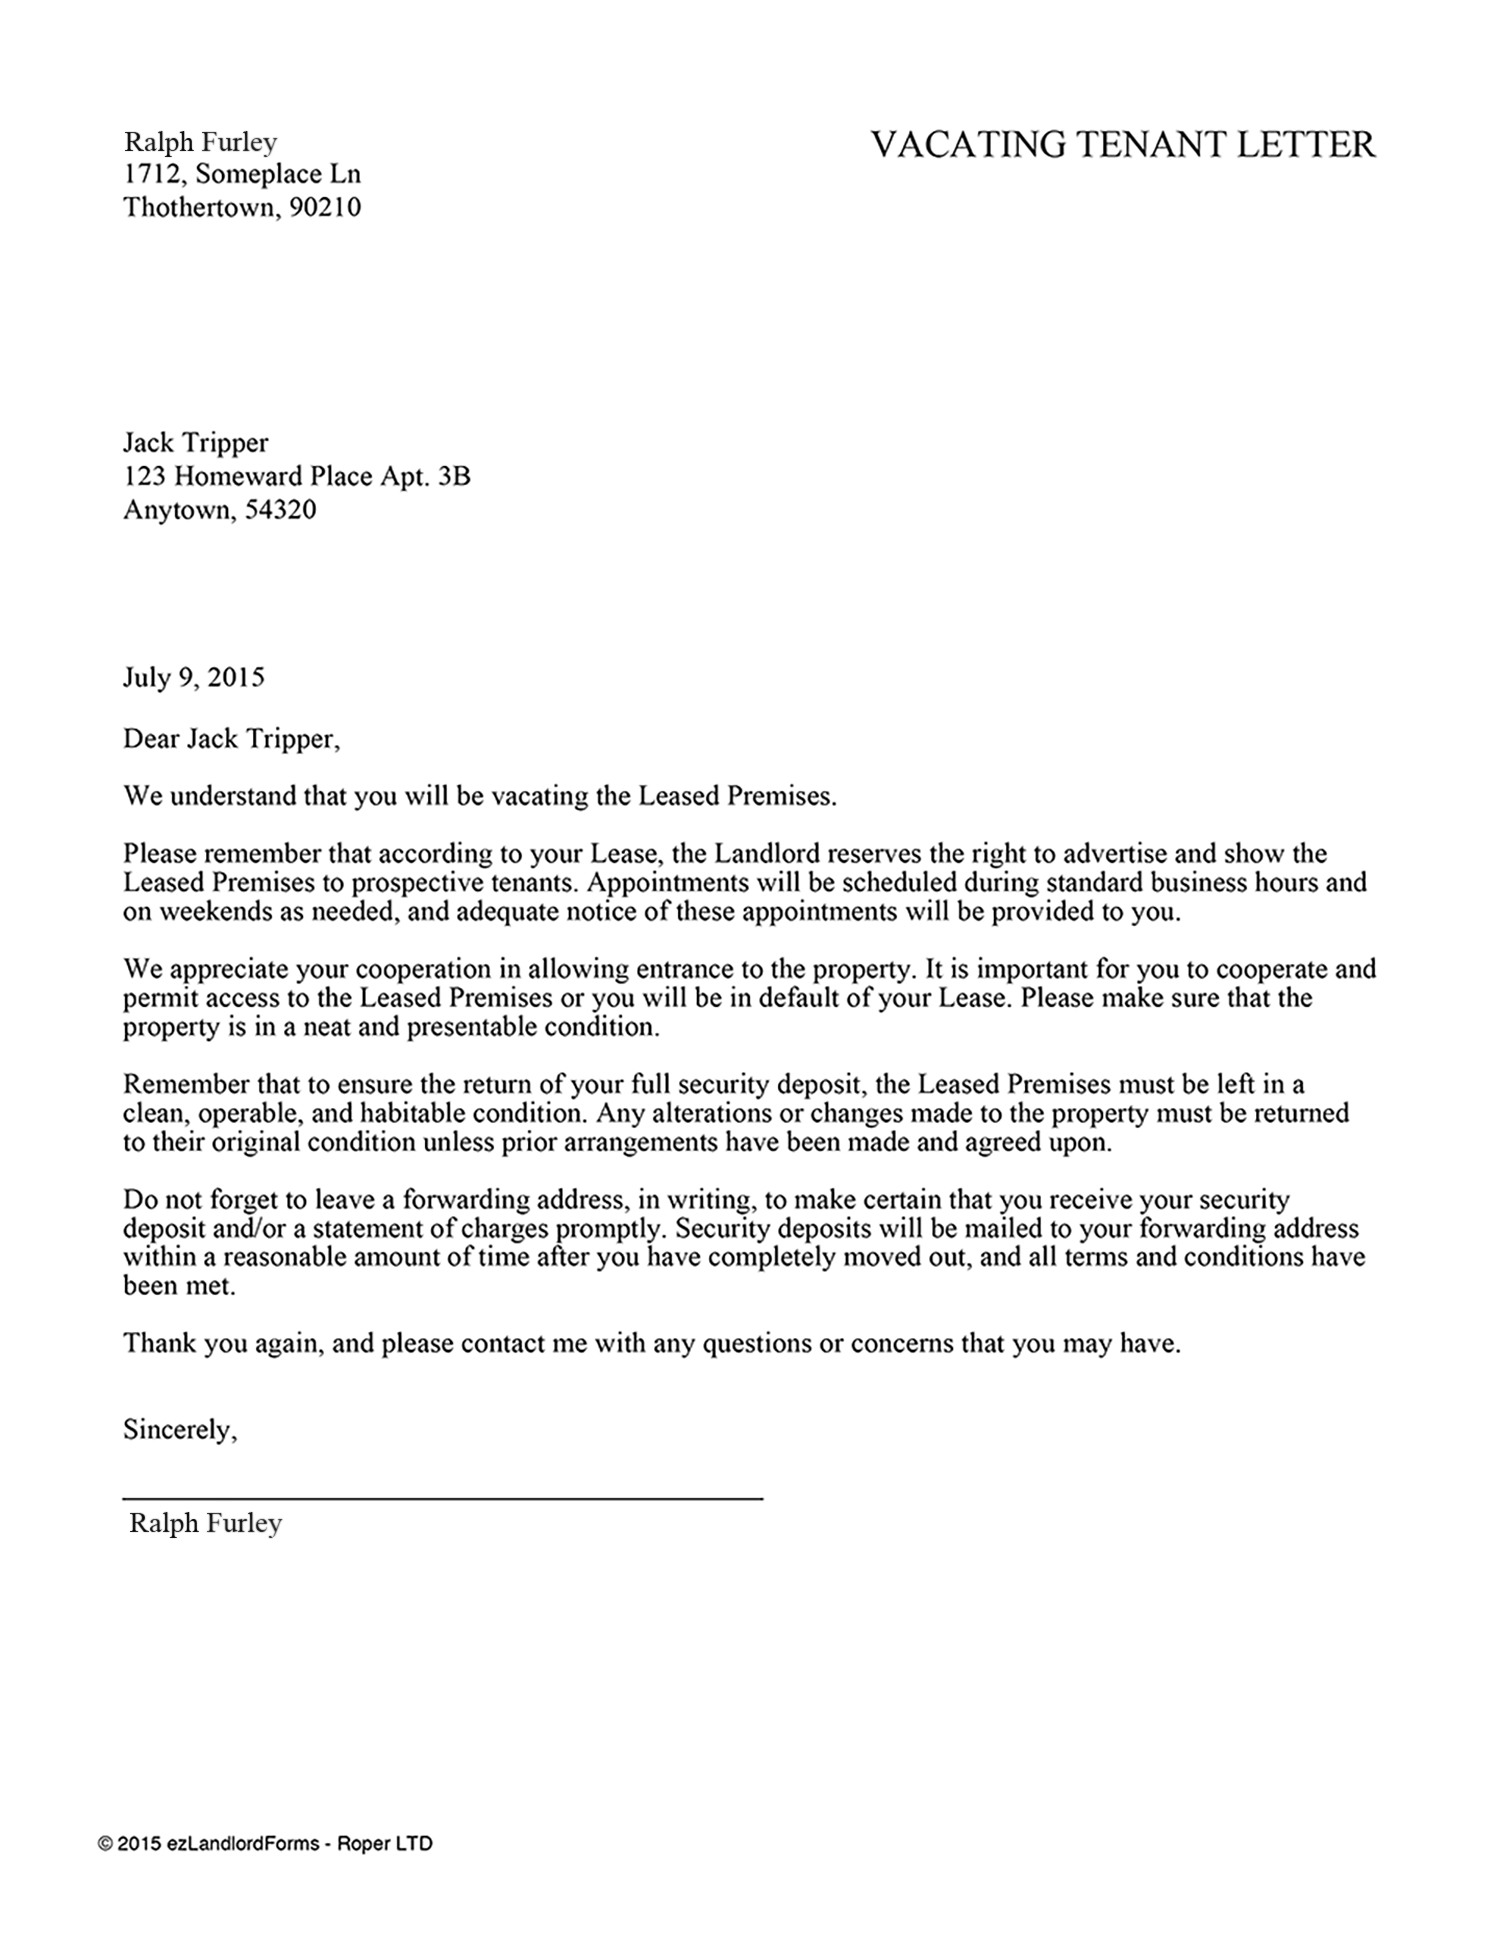 Landlord Letter To Tenant To Move Out from www.ezlandlordforms.com